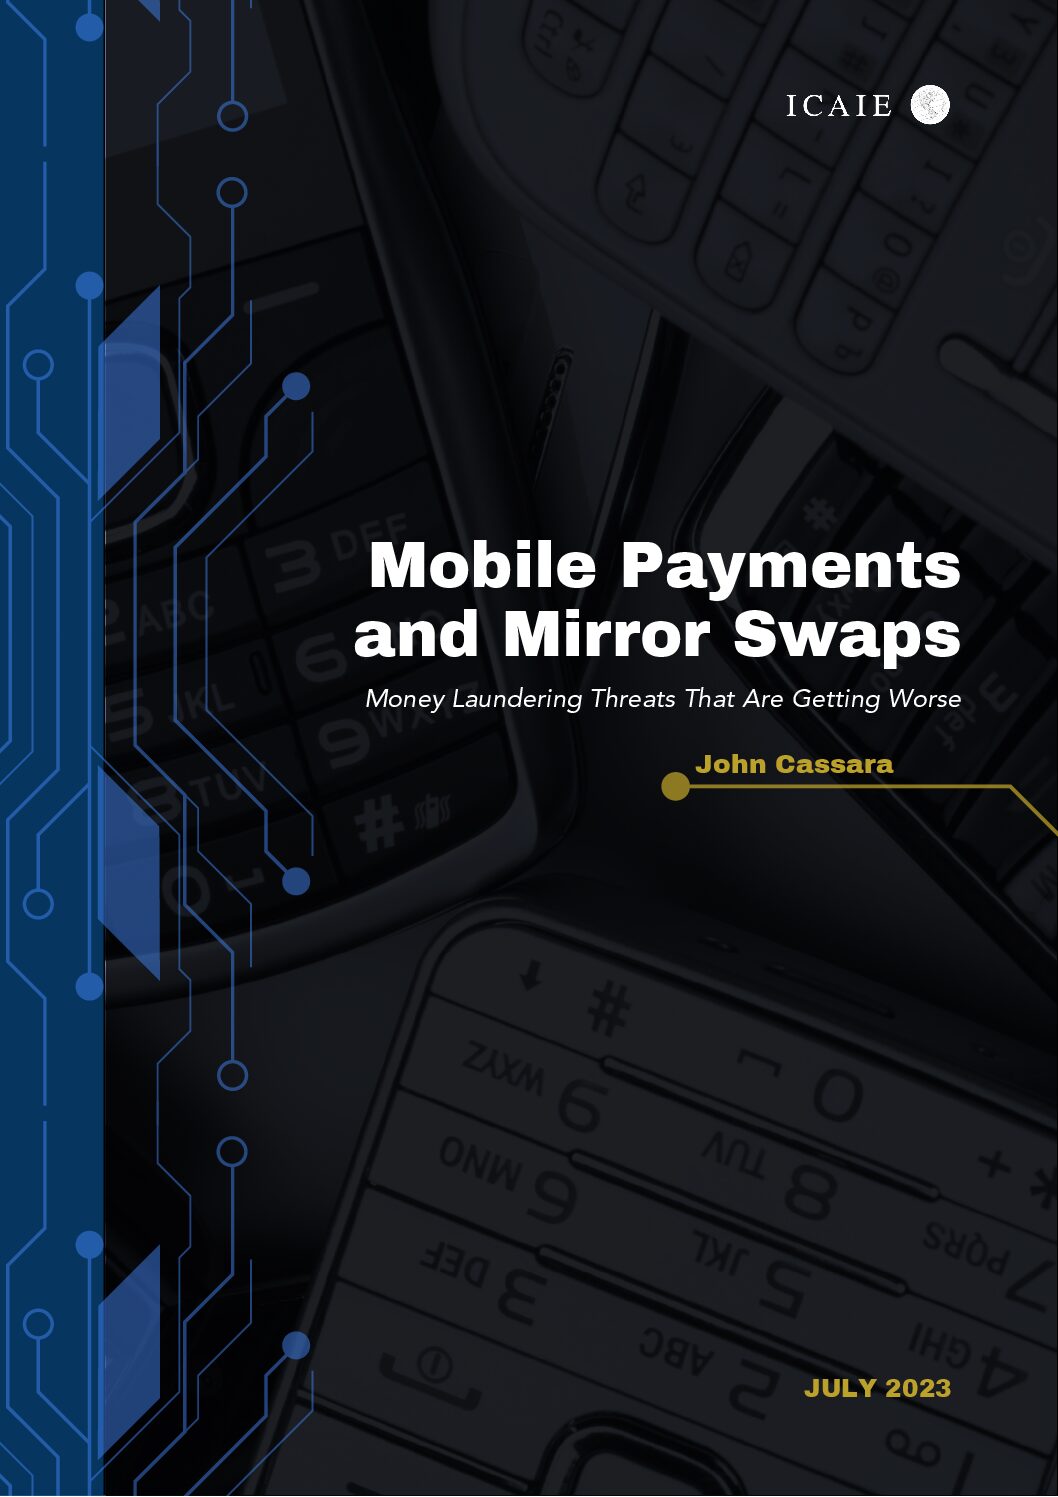 Mobile Payments and Mirror Swaps Print Version